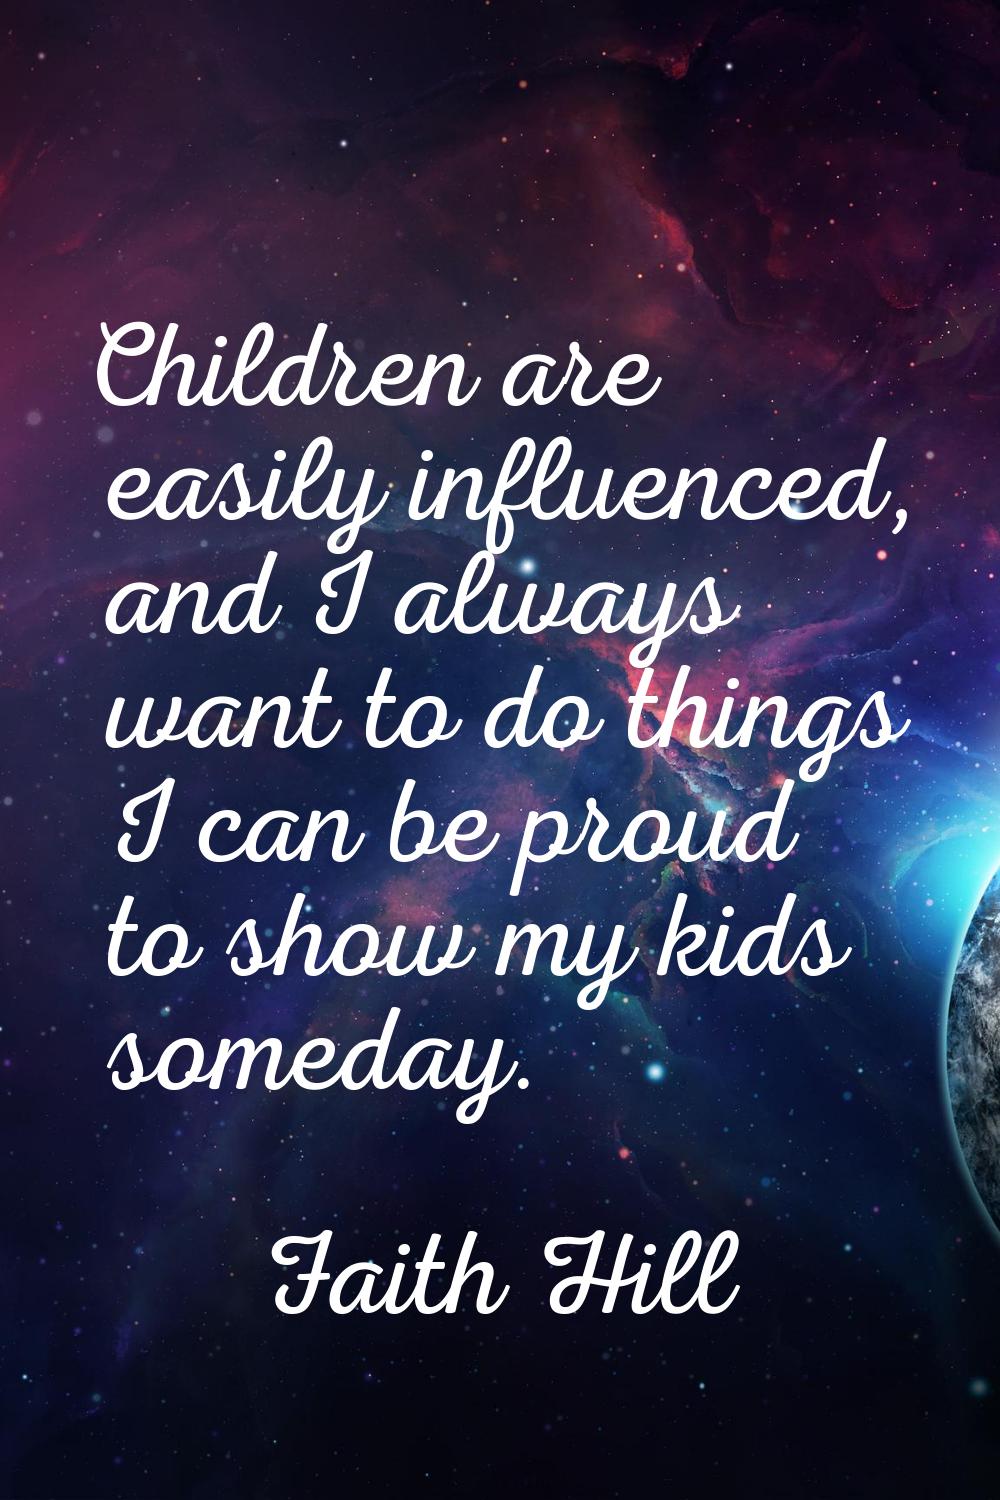 Children are easily influenced, and I always want to do things I can be proud to show my kids somed